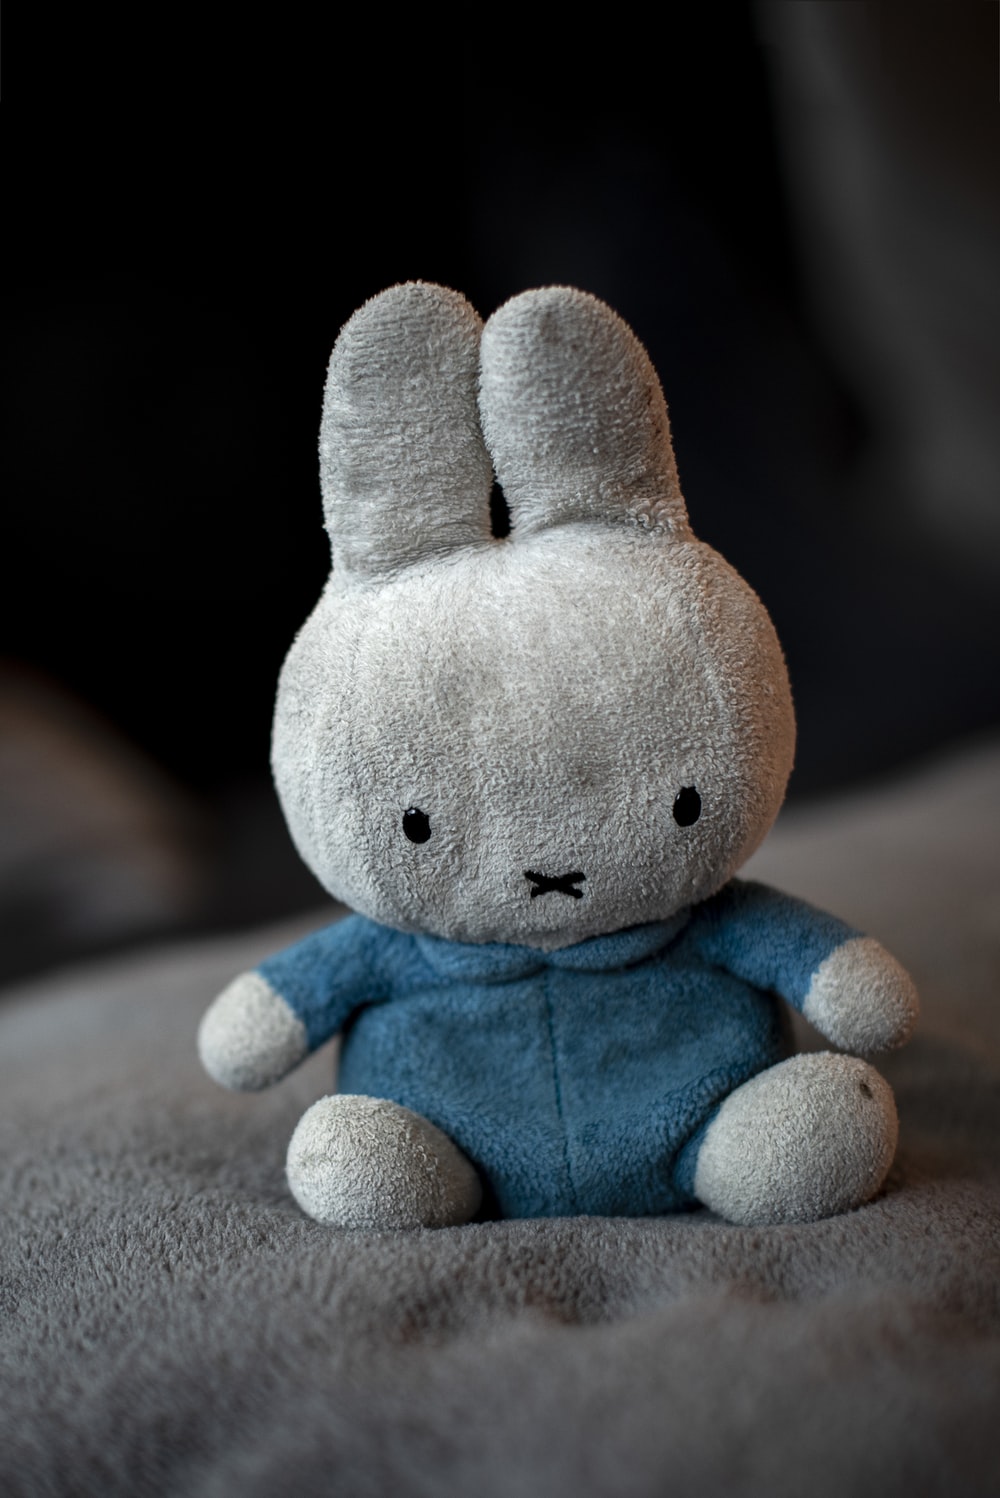 Soft Toy Picture. Download Free Image